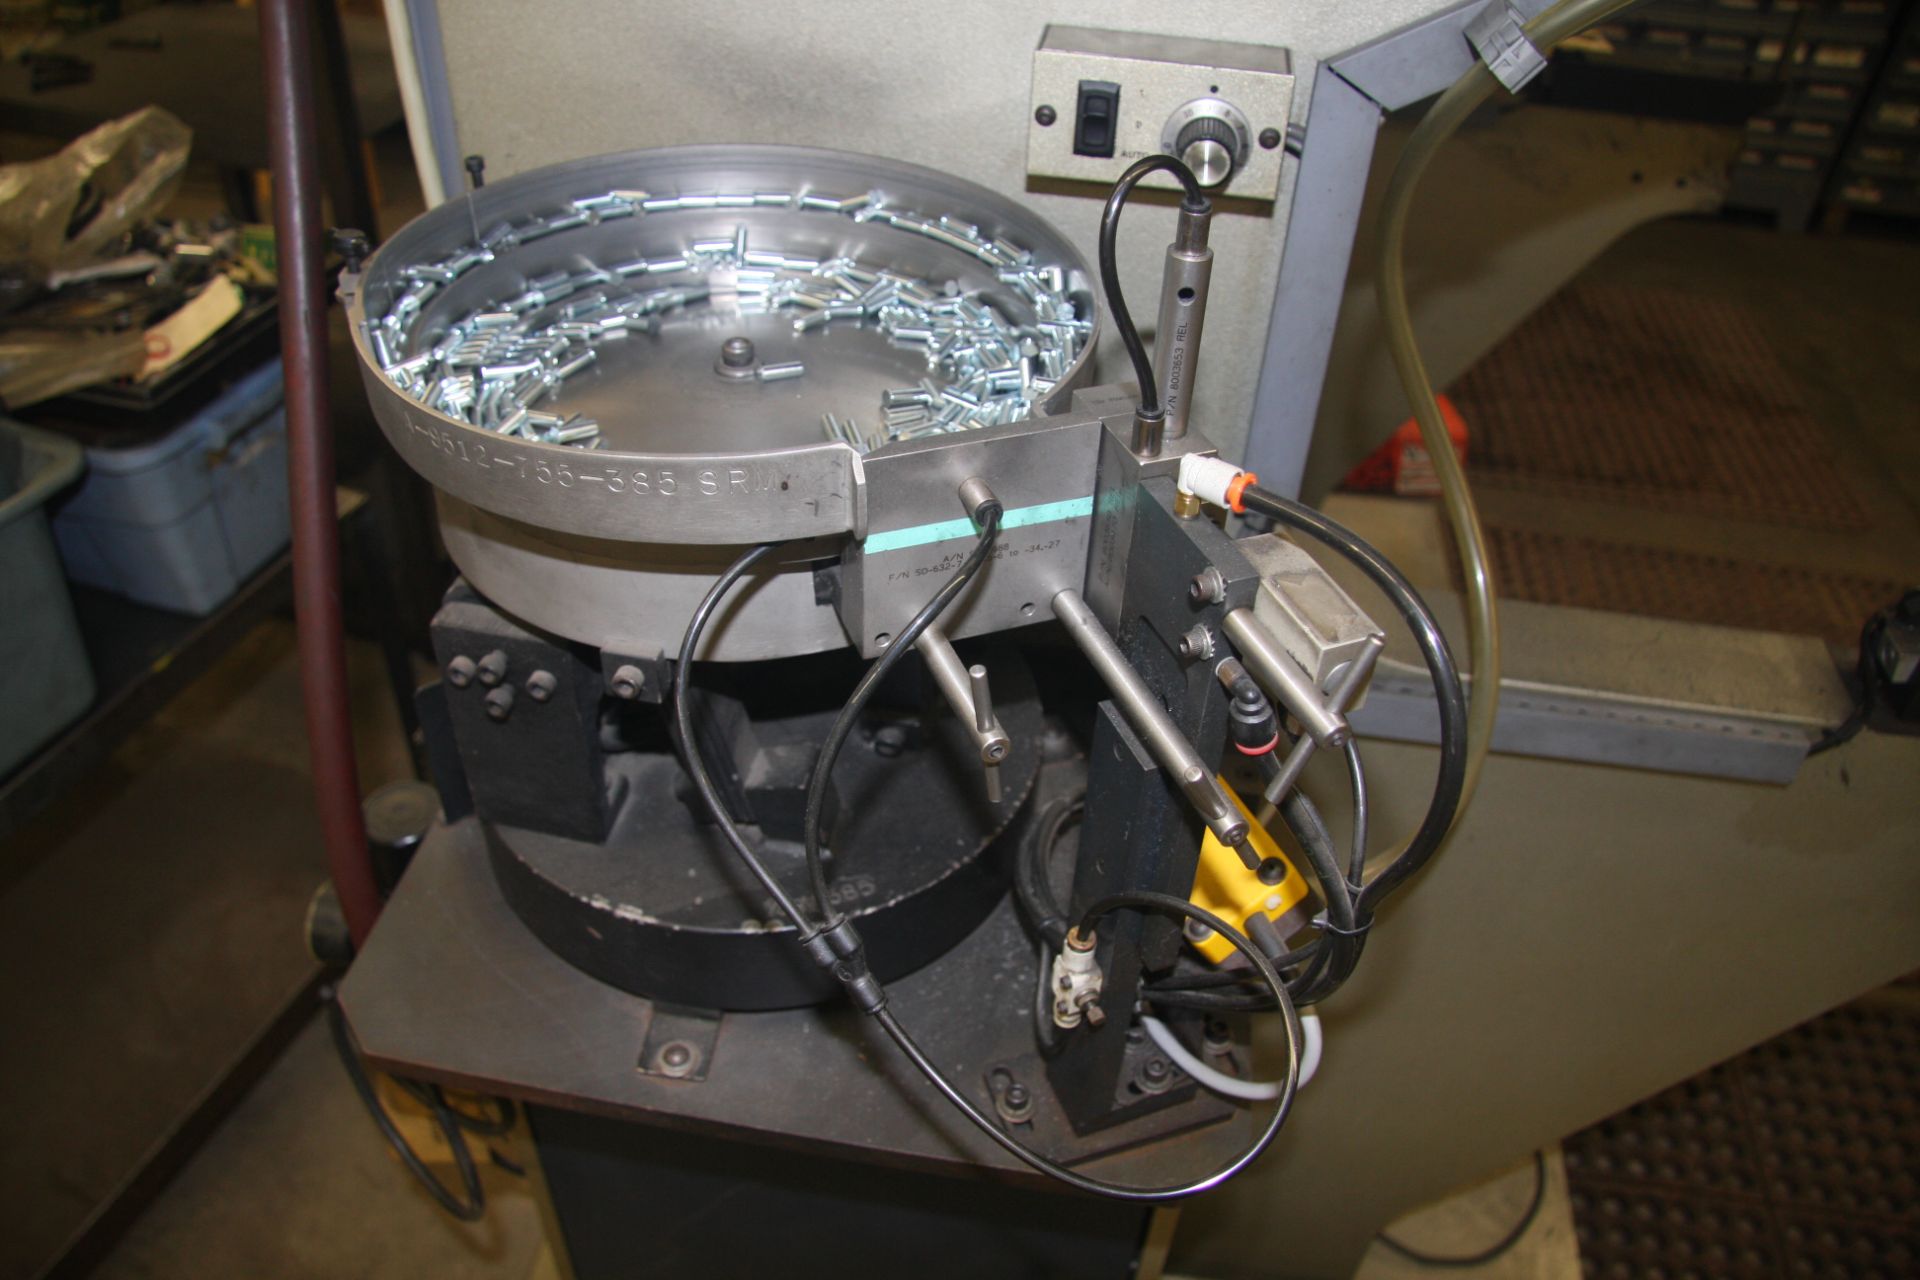 Pemserter Series 2000A Insertion Press with Bowl Feed & Assorted Tooling - Image 2 of 8